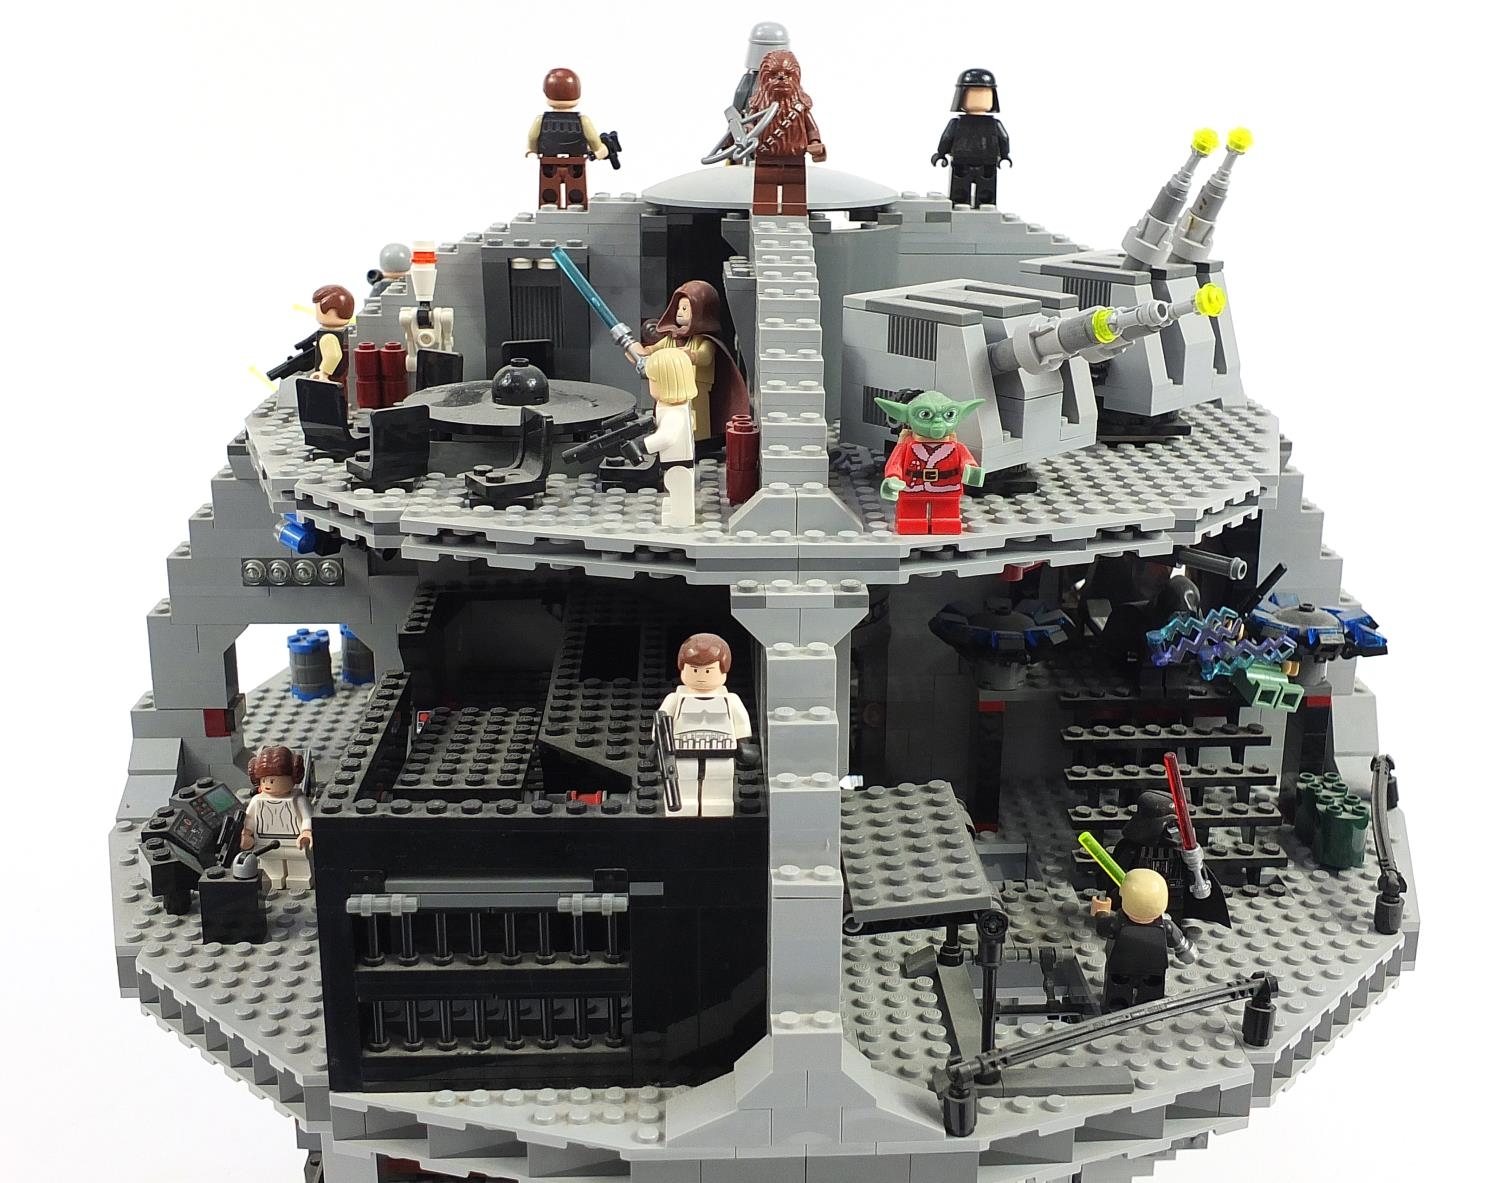 Completed Lego Star Wars Death Star with instructions no 10188, 41cm high - Image 5 of 7